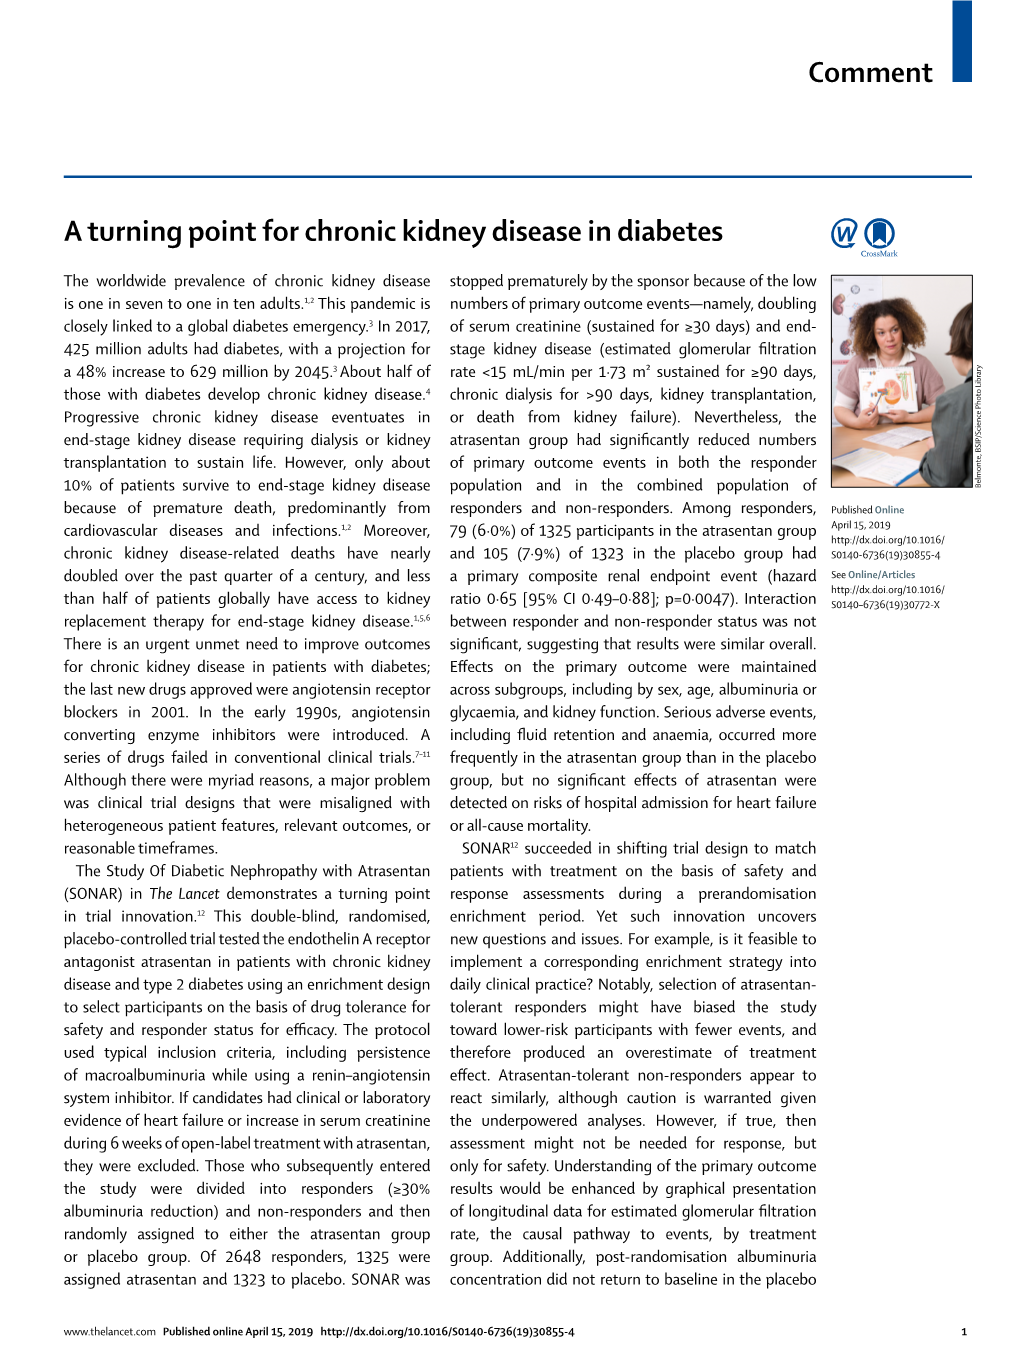 A Turning Point for Chronic Kidney Disease in Diabetes